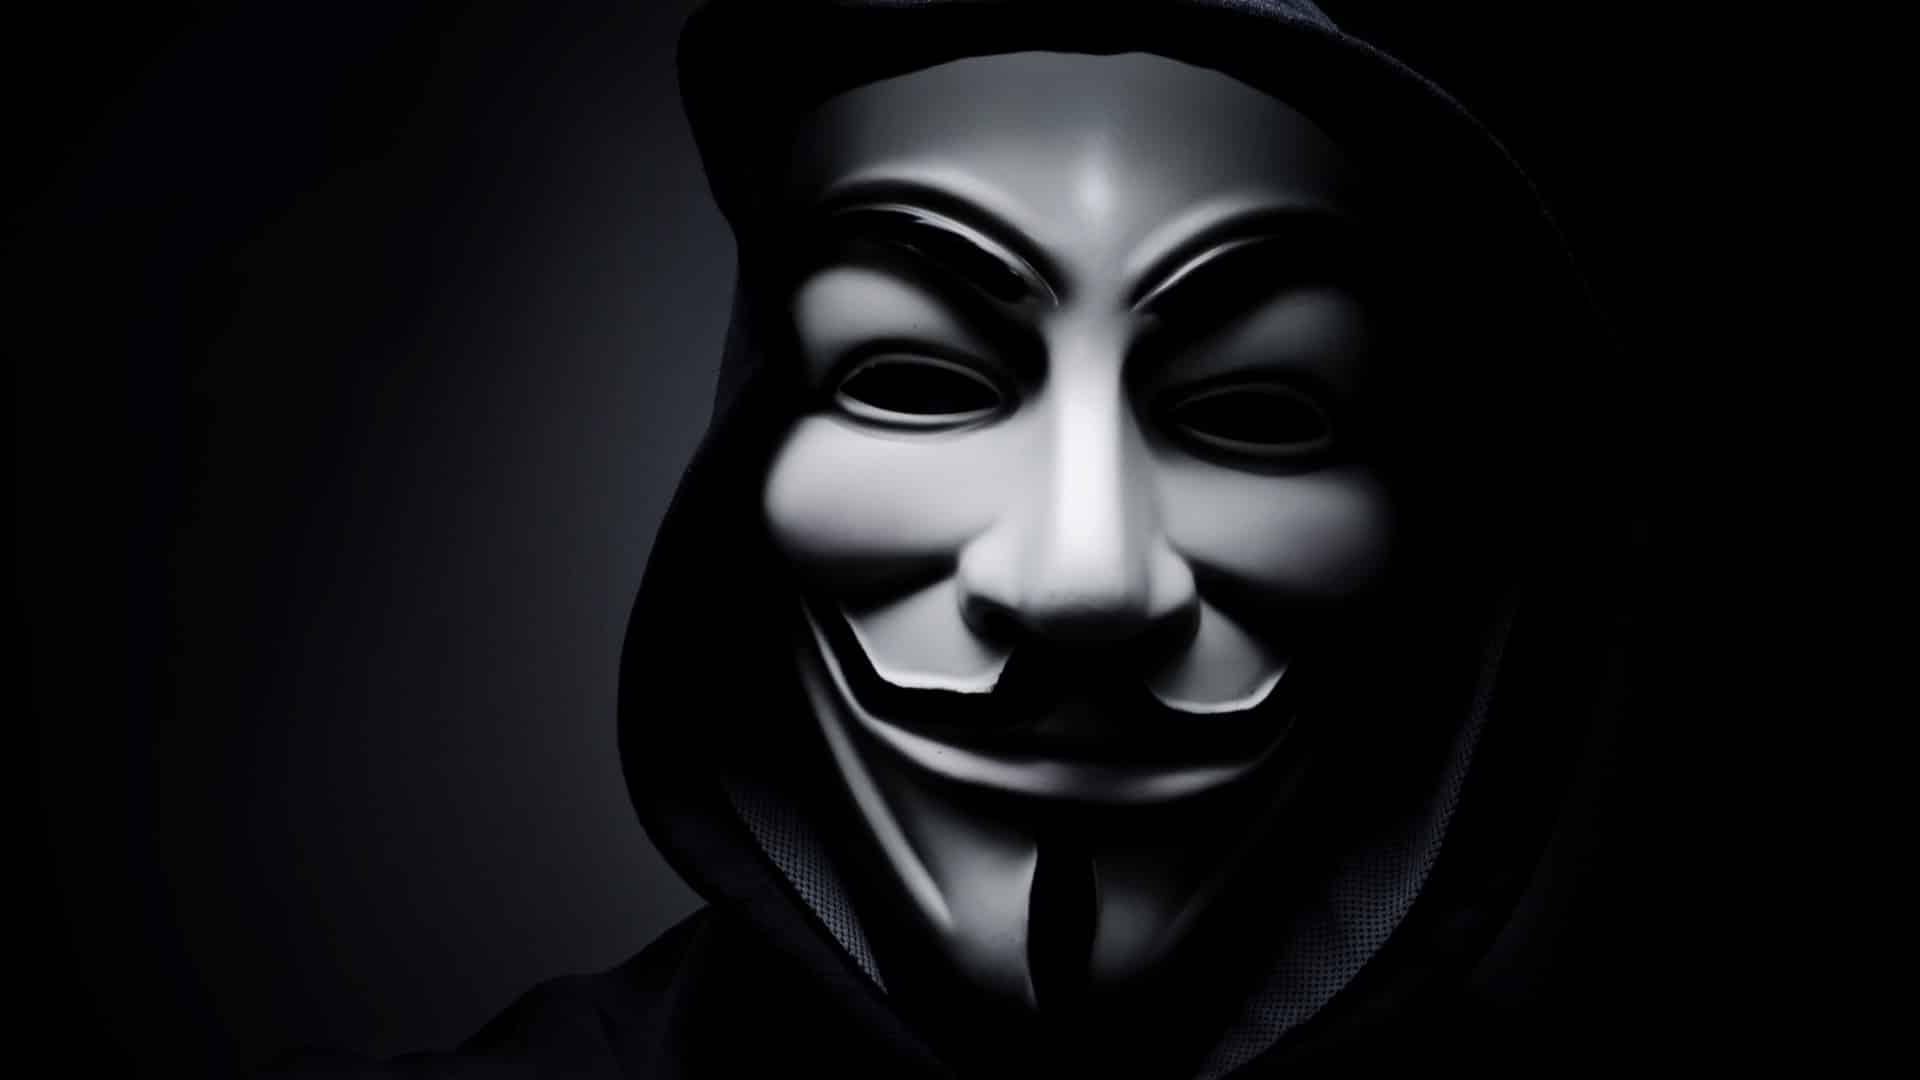 anonymous vs russia hacktivism